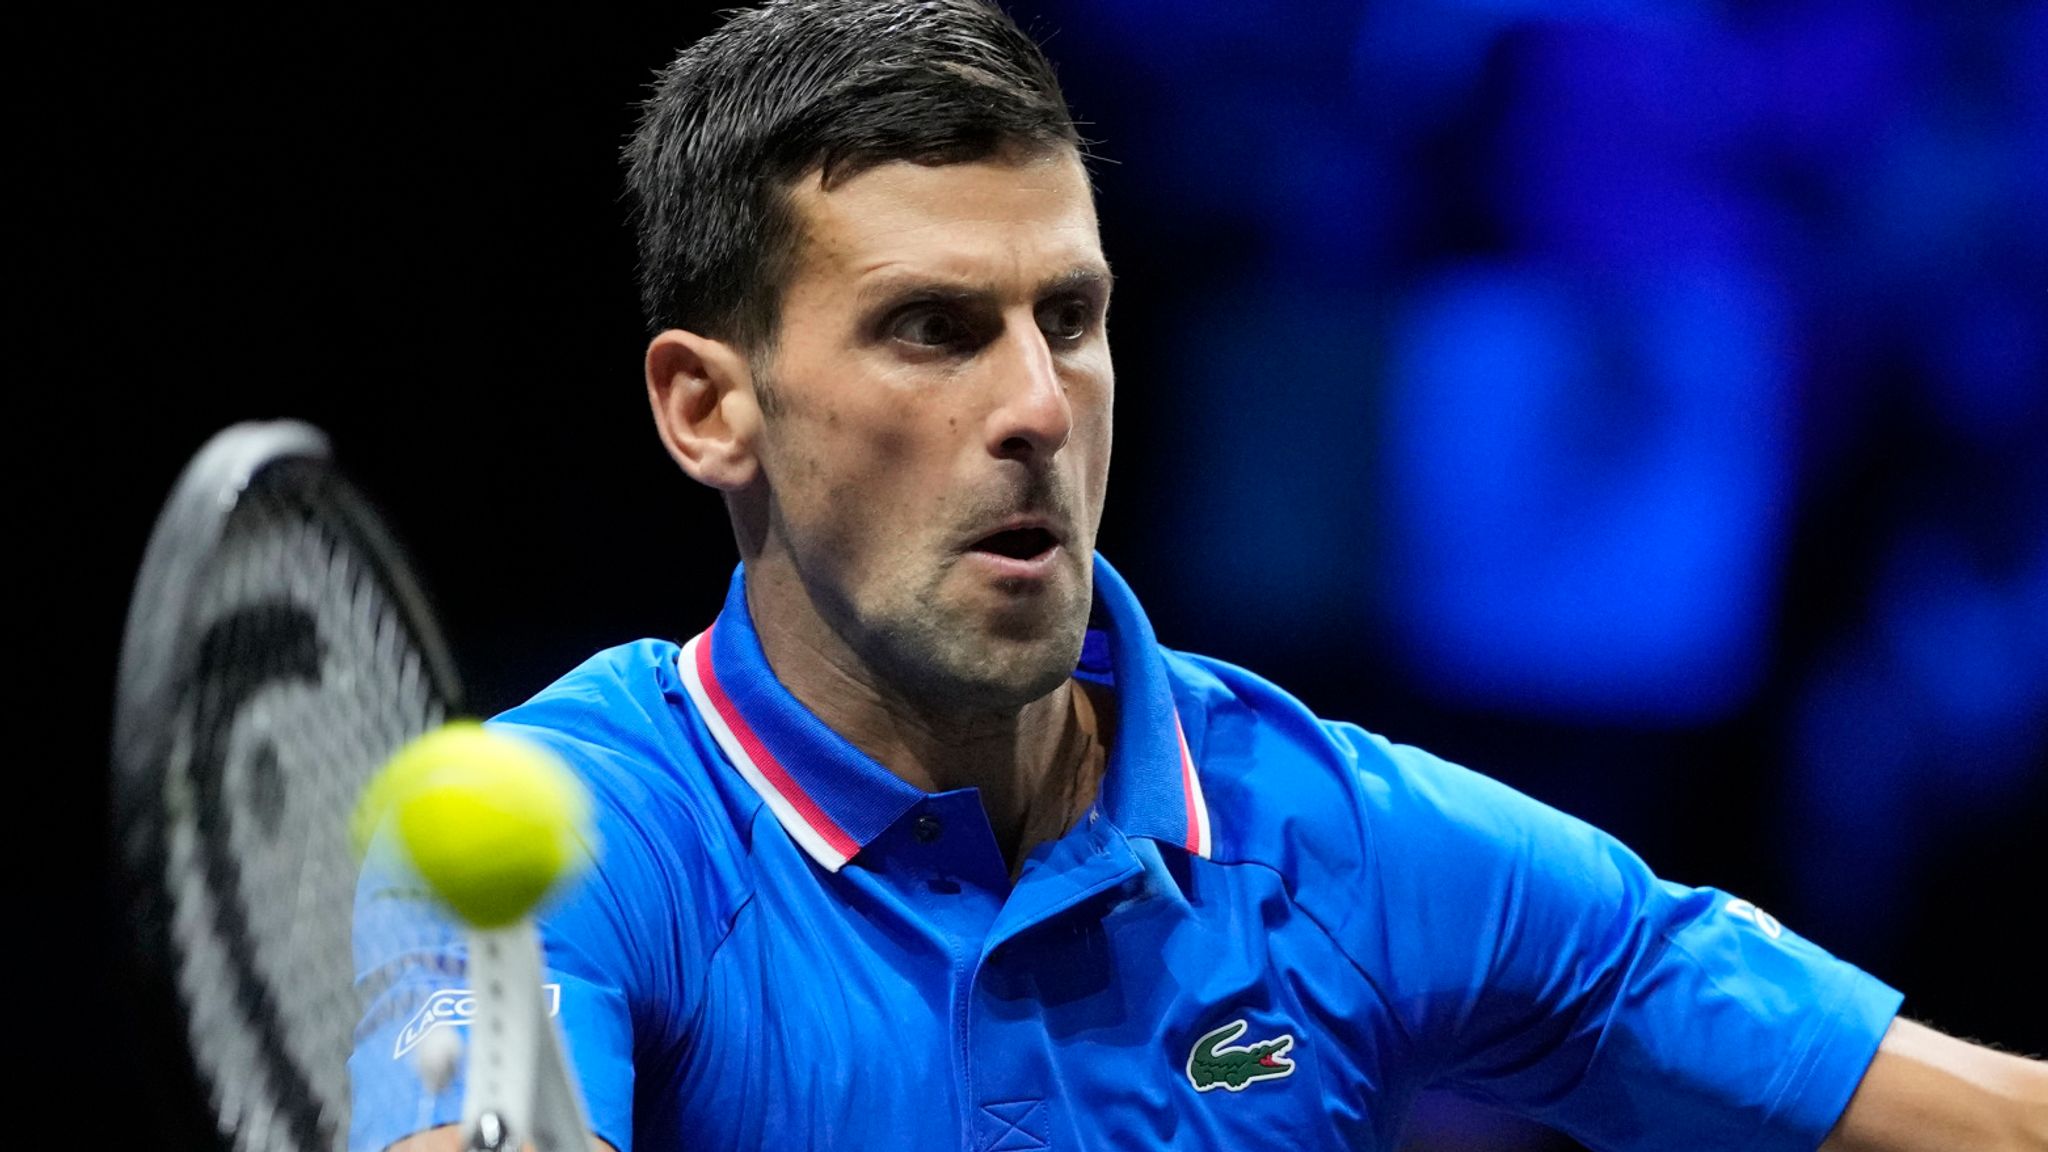 Laver Cup Novak Djokovic wins twice in same session to move Team Europe 8-4 ahead in London Tennis News Sky Sports